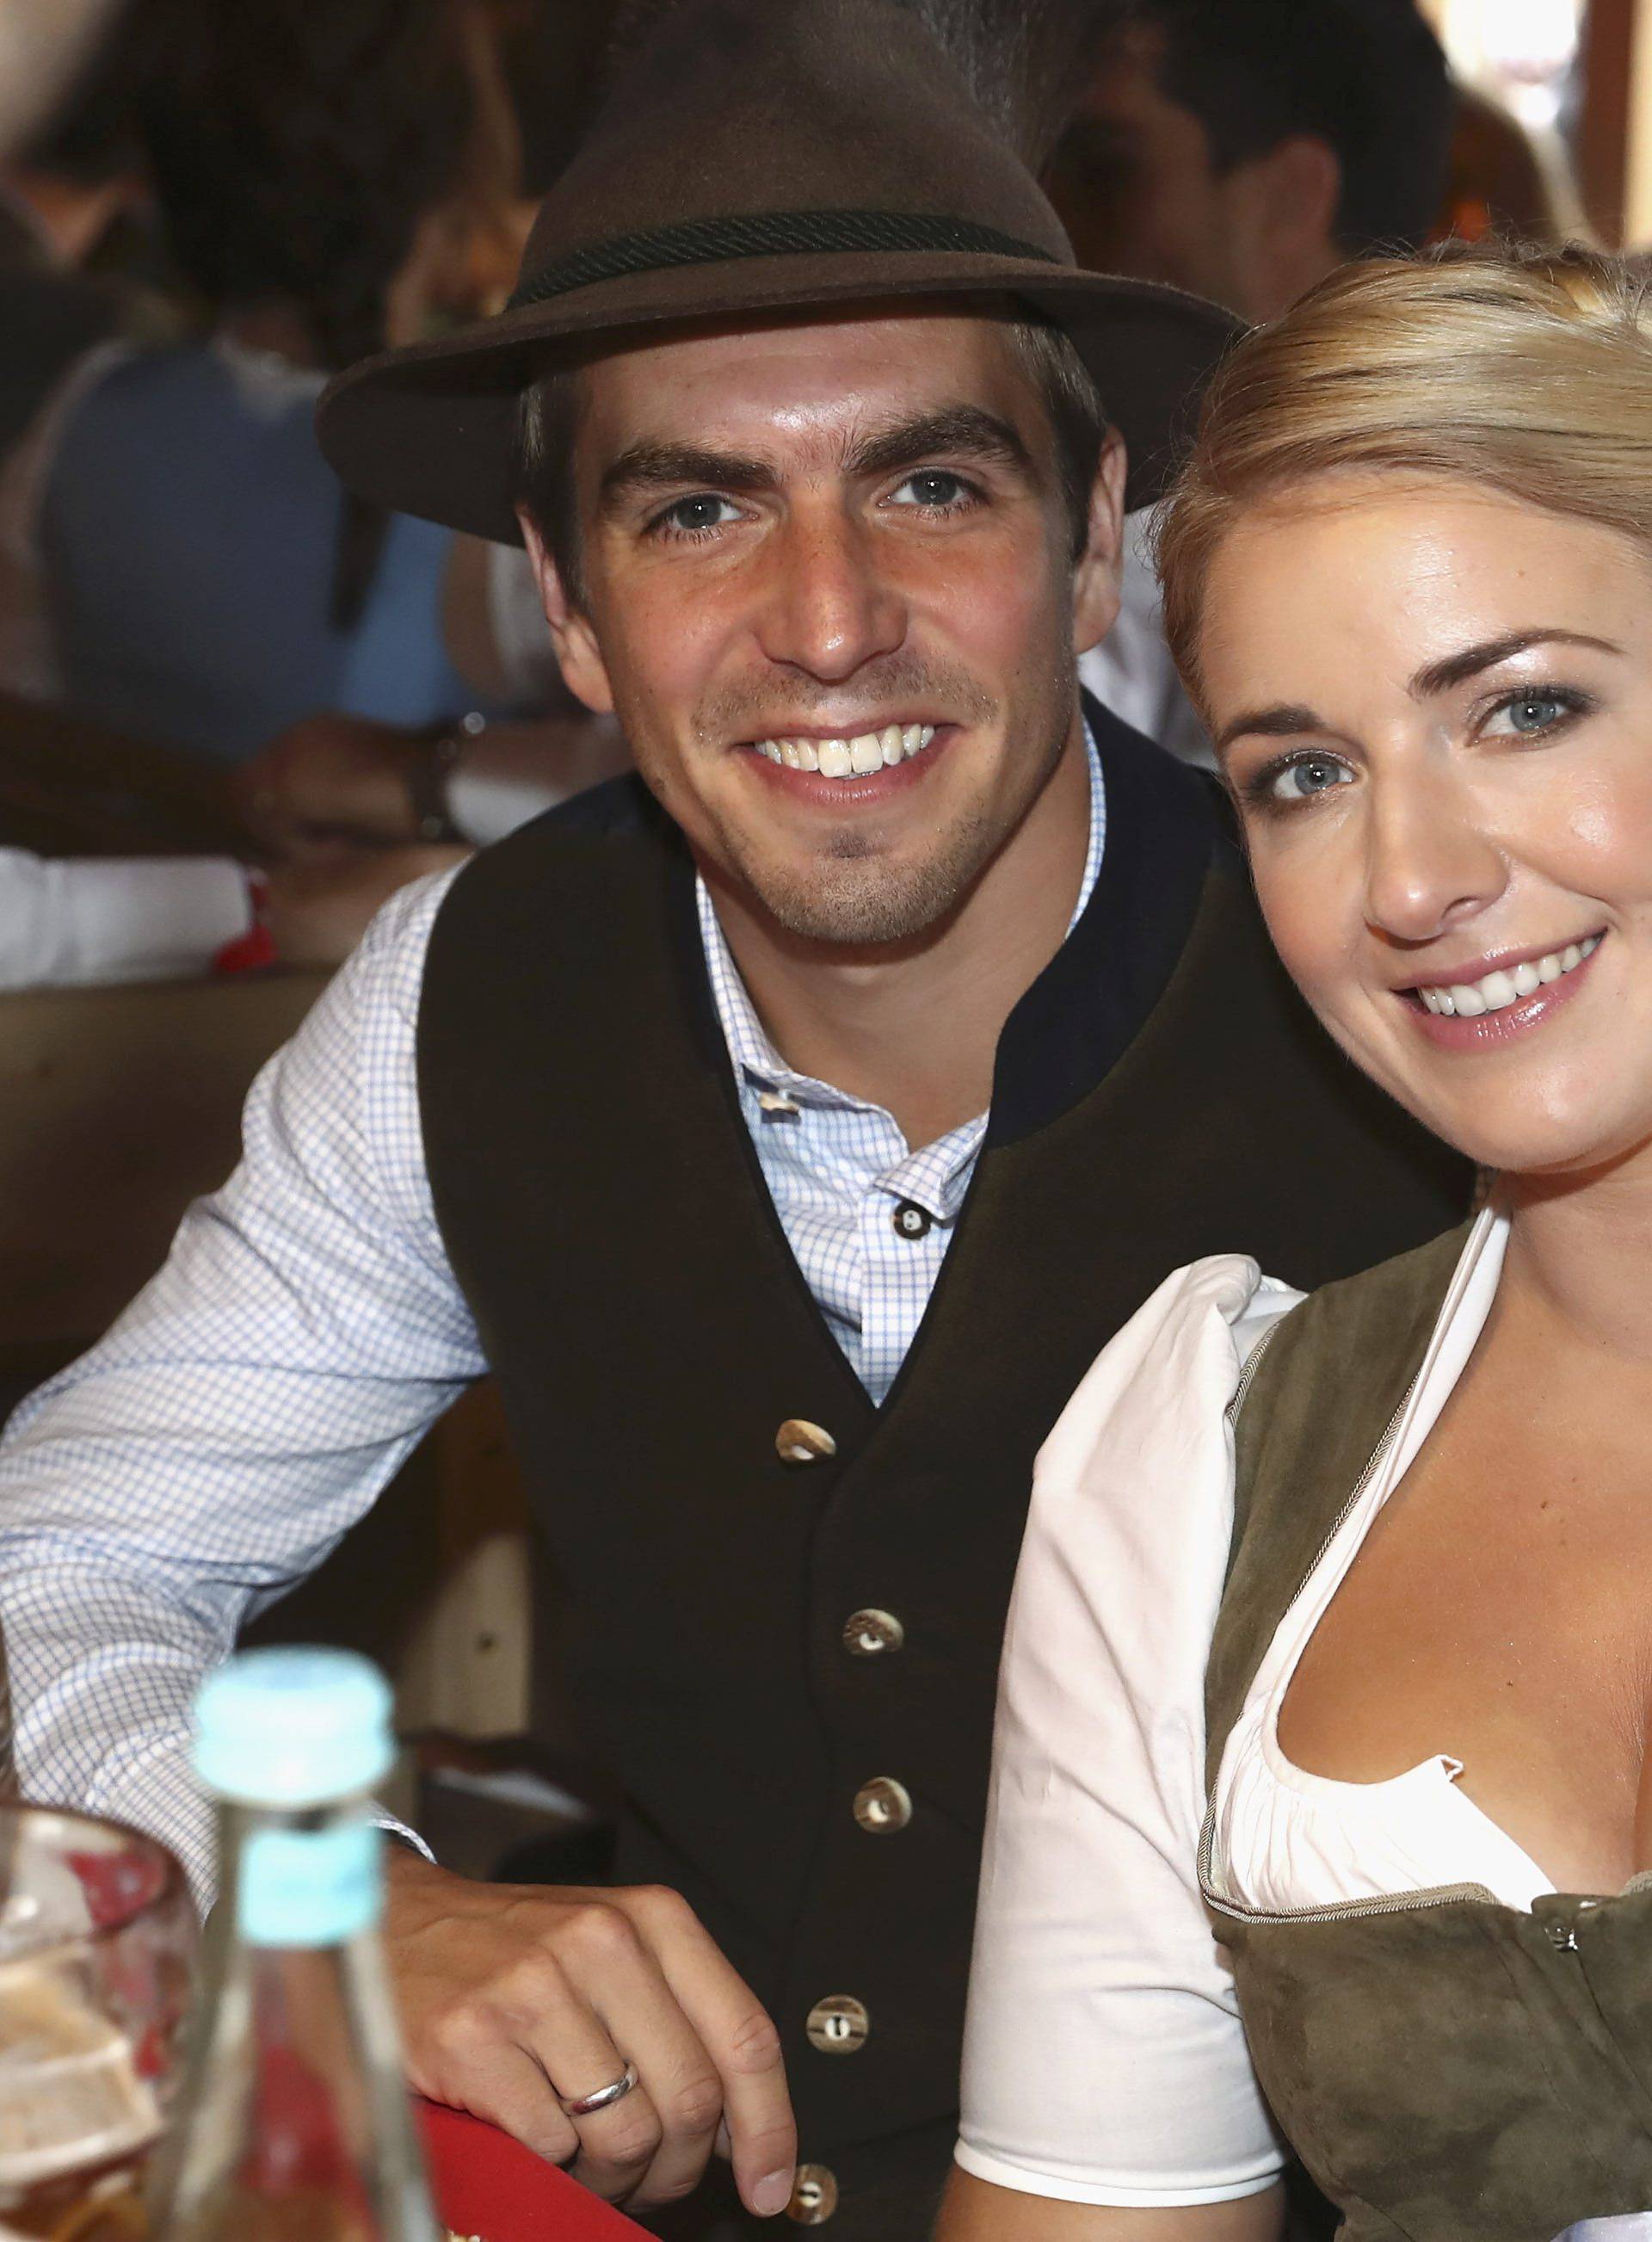 Lahm of FC Bayern Munich and his wife Claudia pose during their visit at the Oktoberfest in Munich